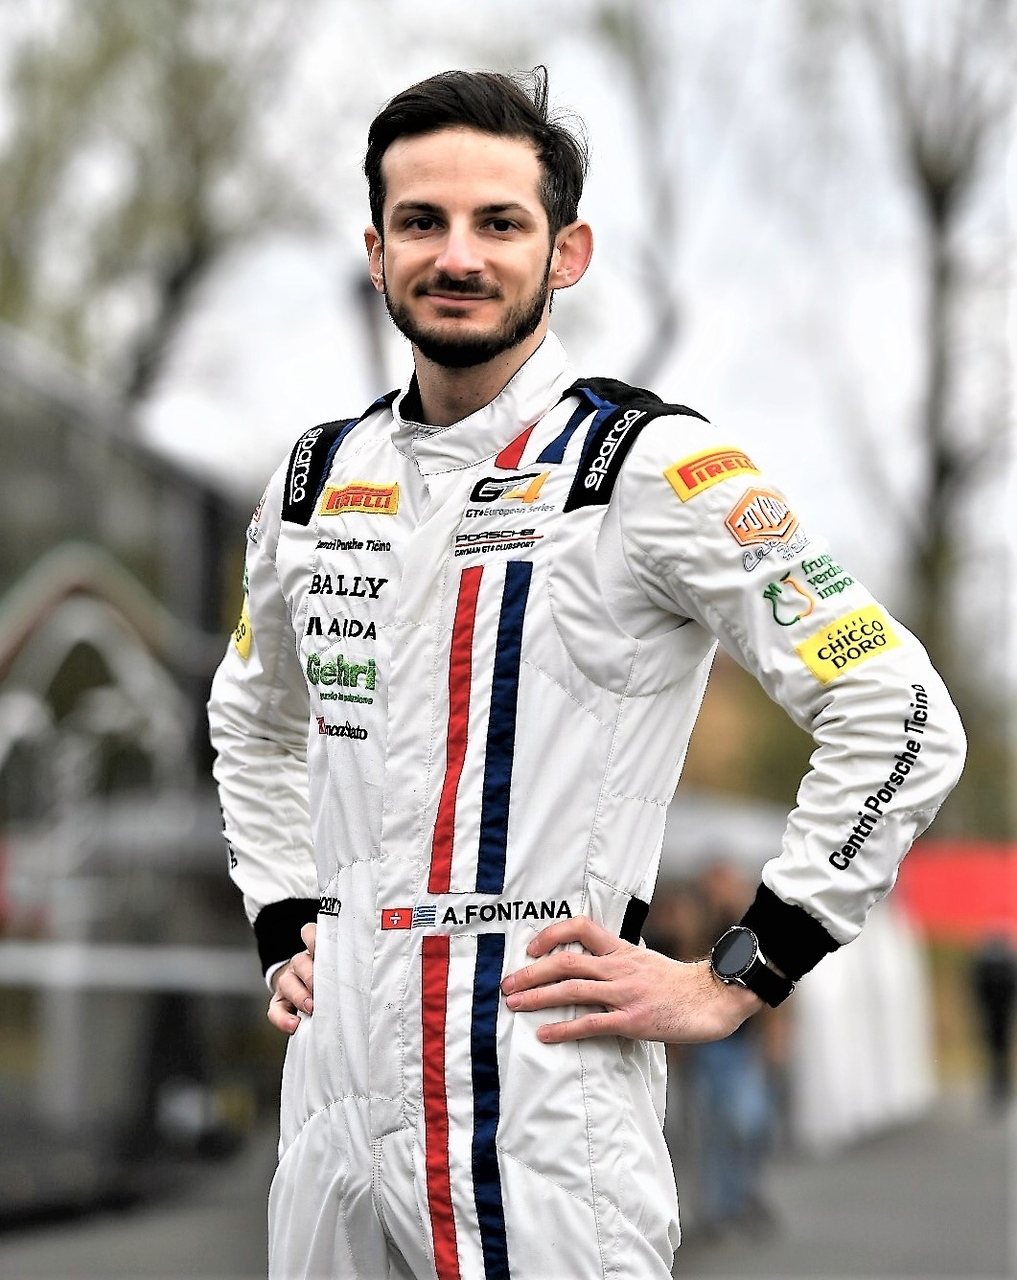 Alex Fontana: the driver from Ticino, born in Lugano on 5 August 1992, deals with the technical commentary at the Formula 1 Grand Prix for the Italian-speaking Swiss Radio and Television